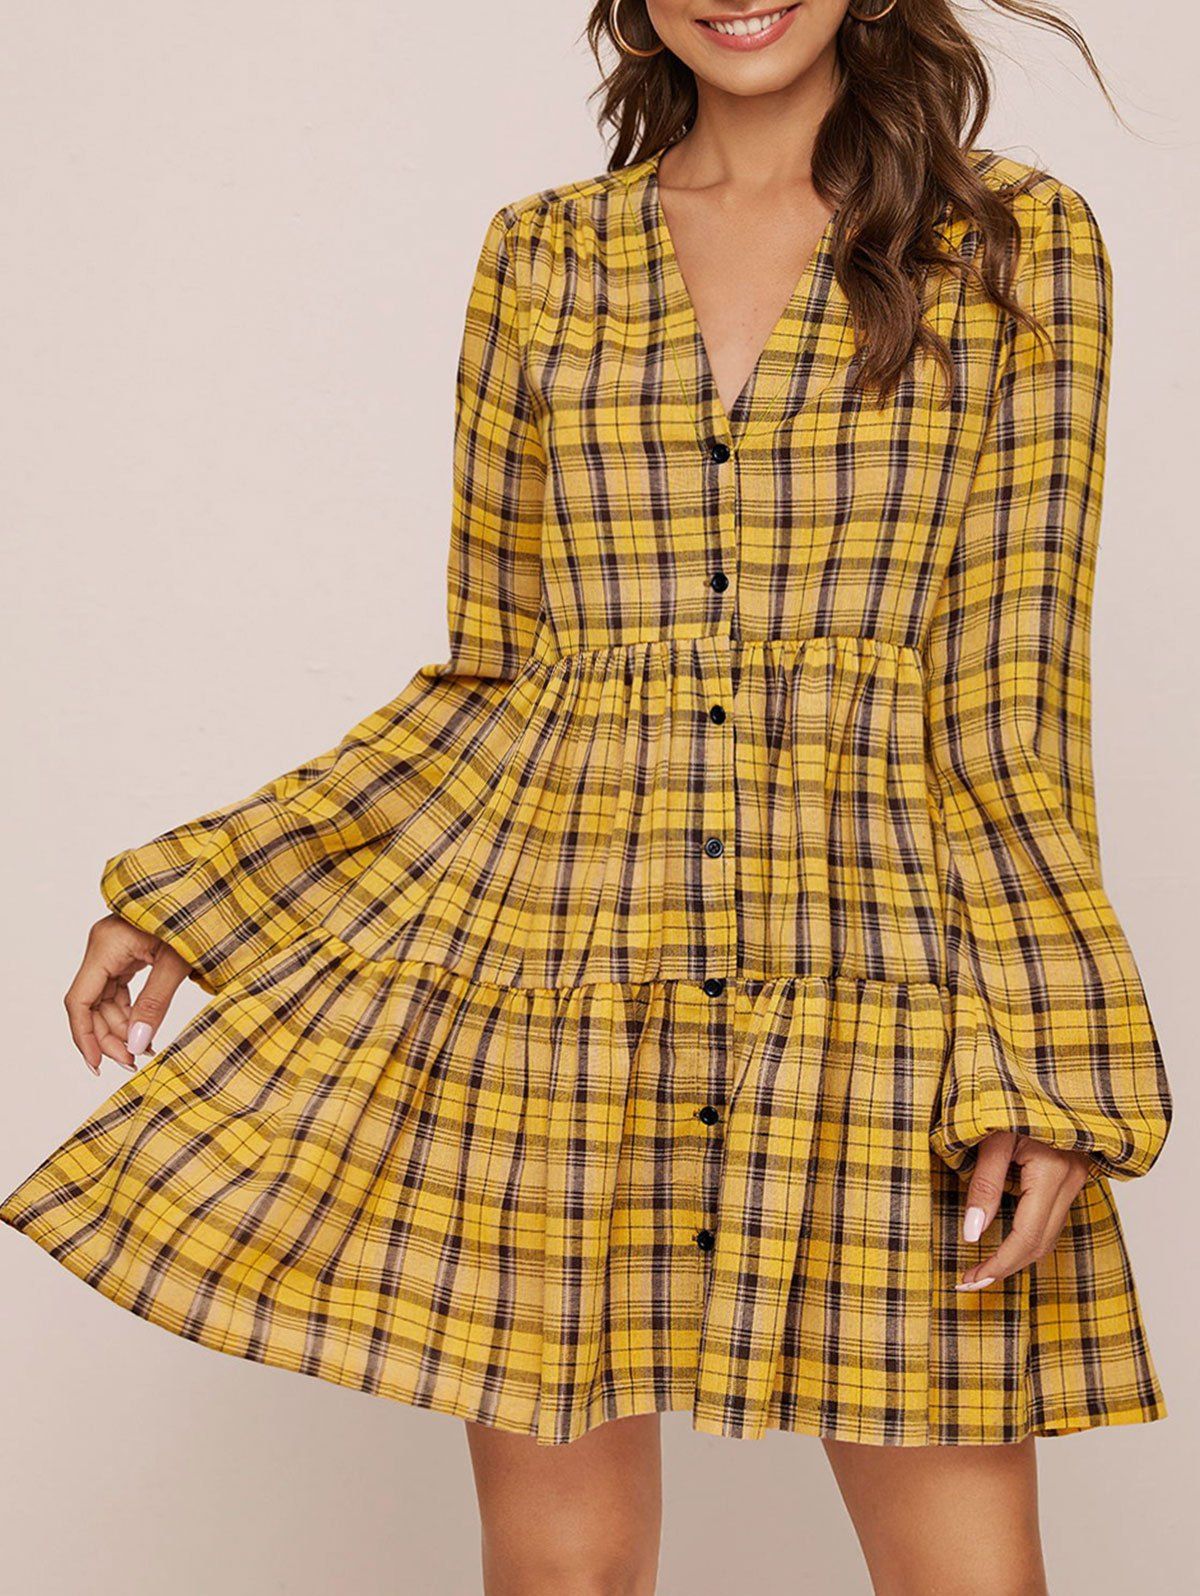 Plaid Button Up Tiered Dress - YELLOW L